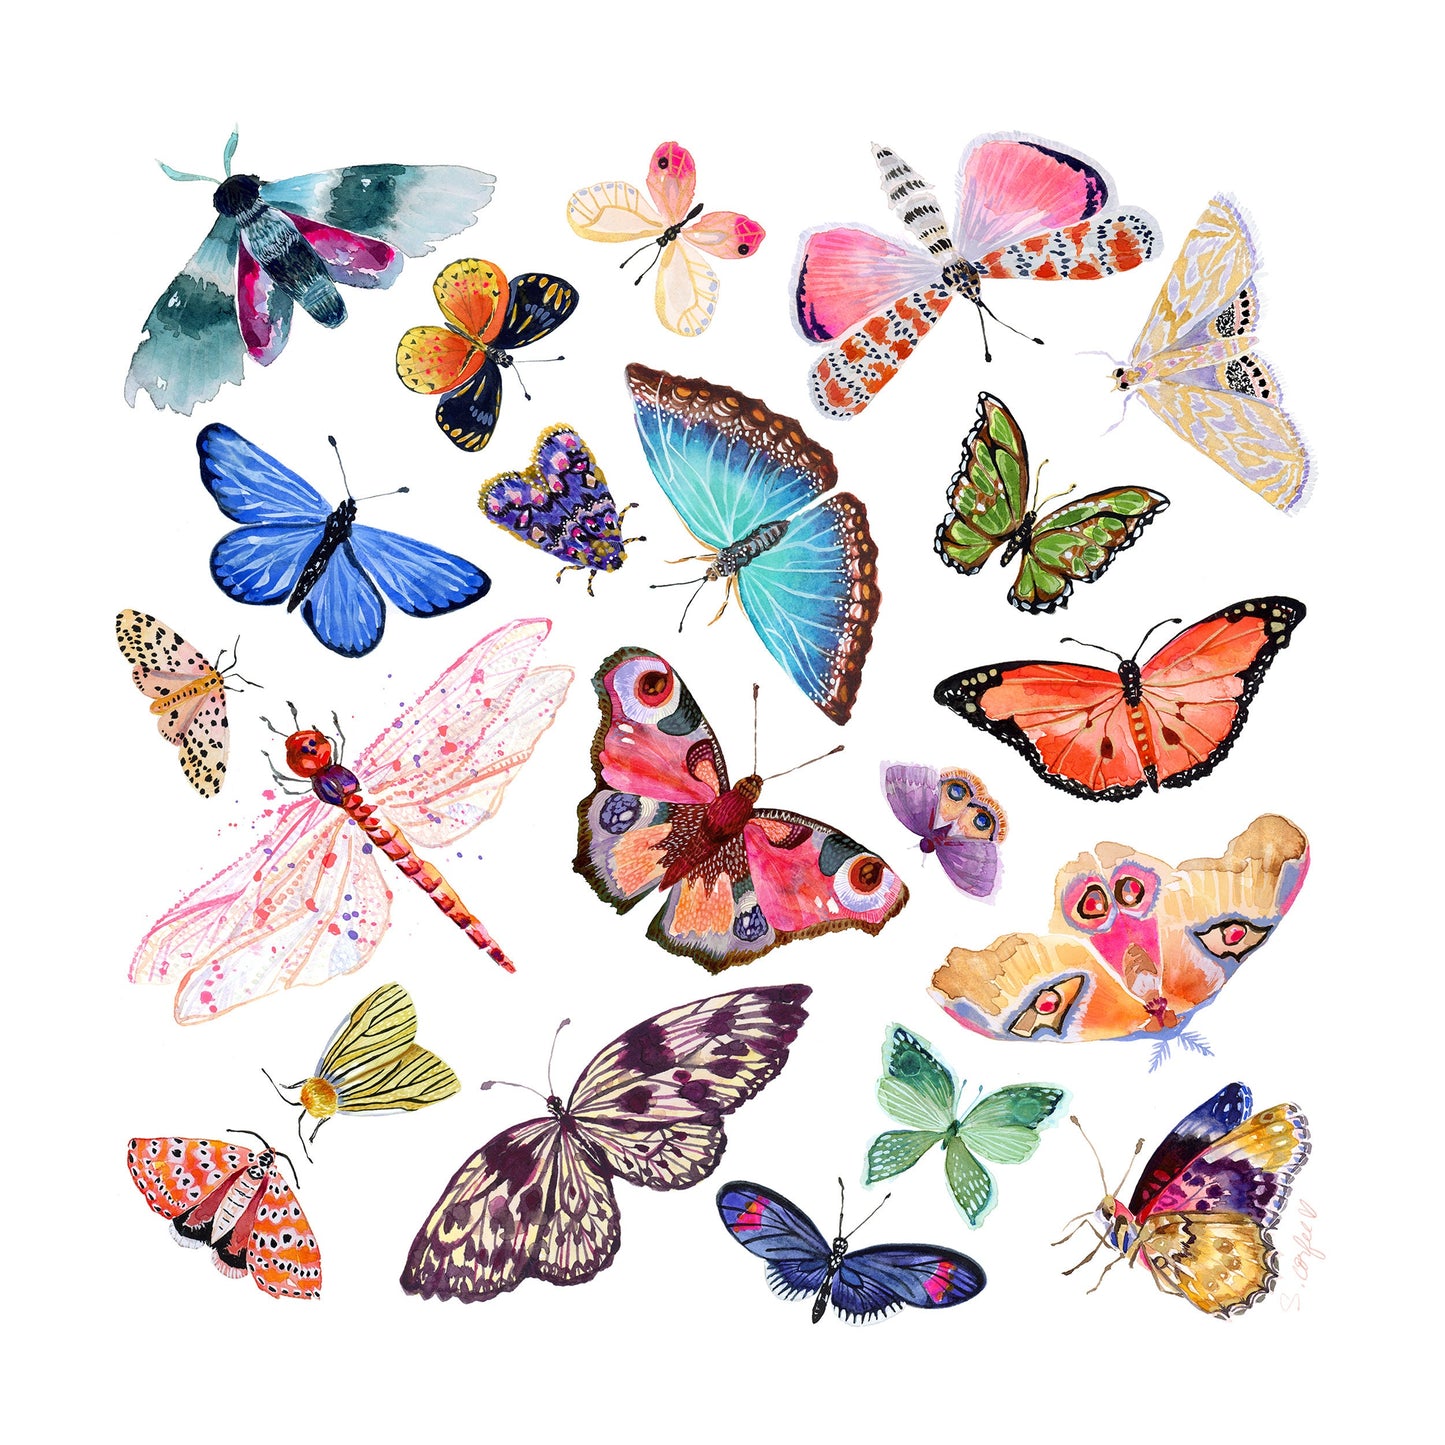 Butterfly Scatter COMPLETE - PRINT  watercolor painting, paper print, colorful print, cheerful print, moth, butterfly, wings